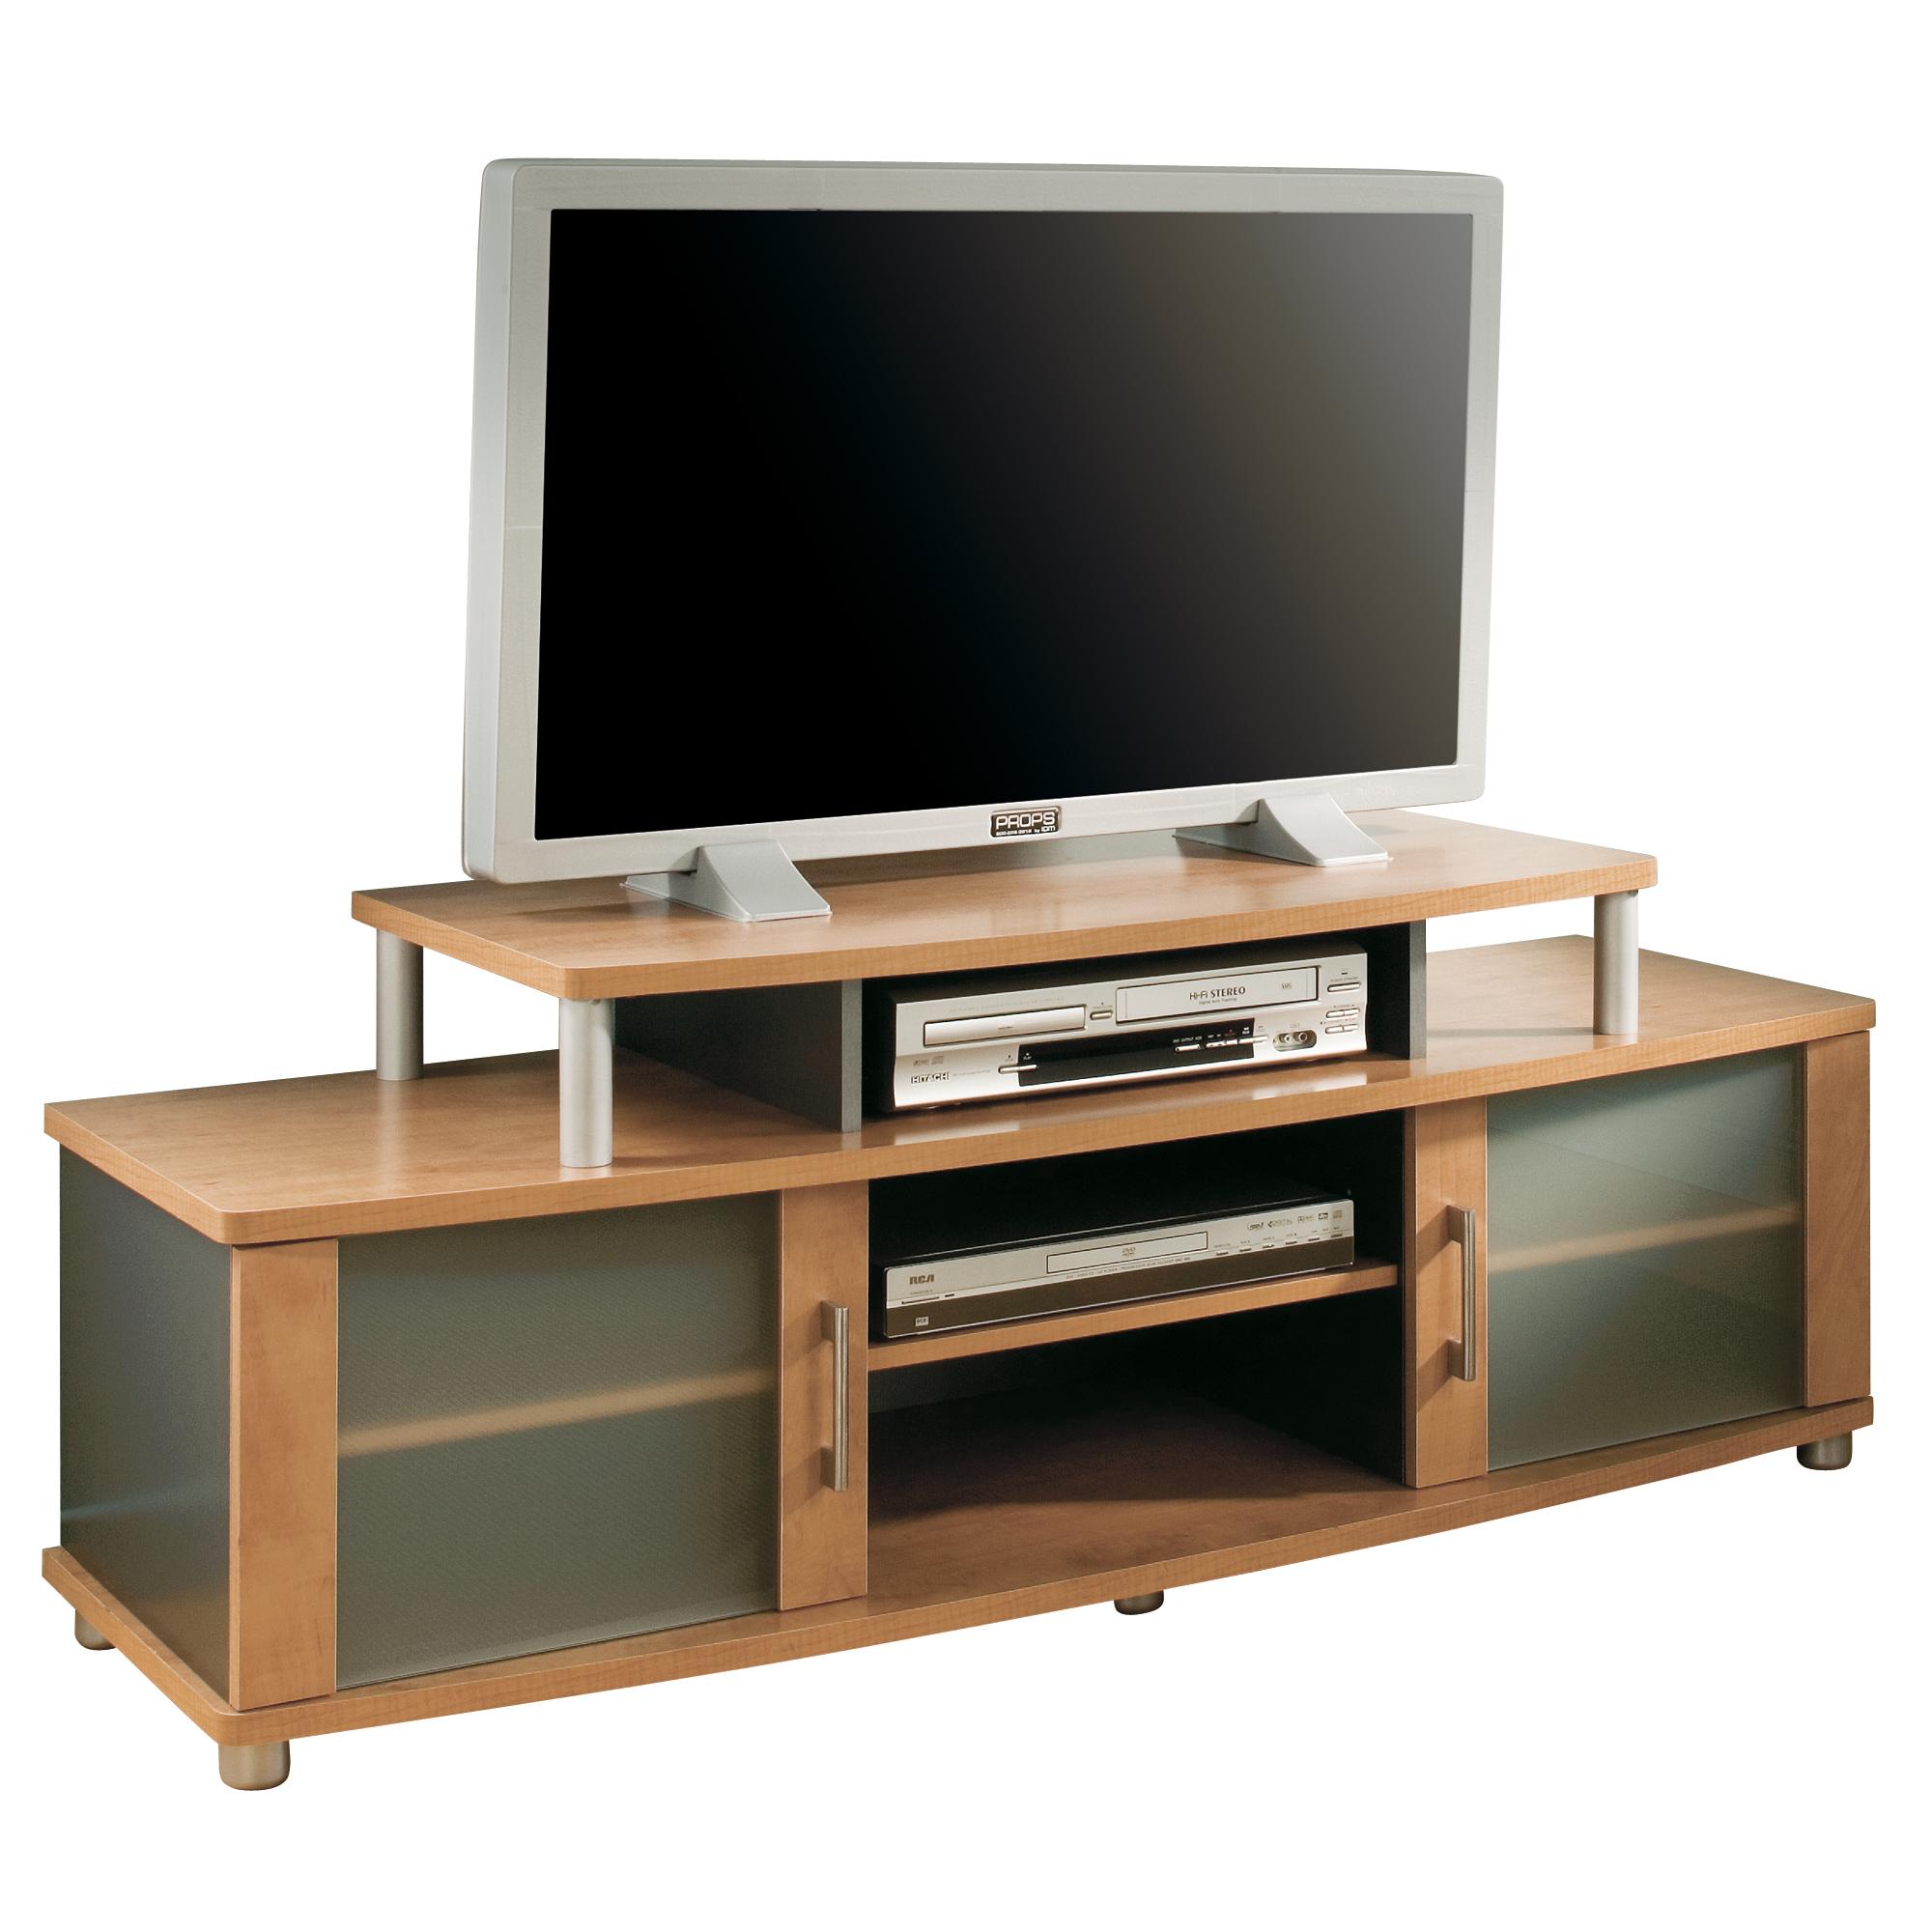 South Shore City Life TV Stand-Finish:Charcoal & Honeydew - image 4 of 7